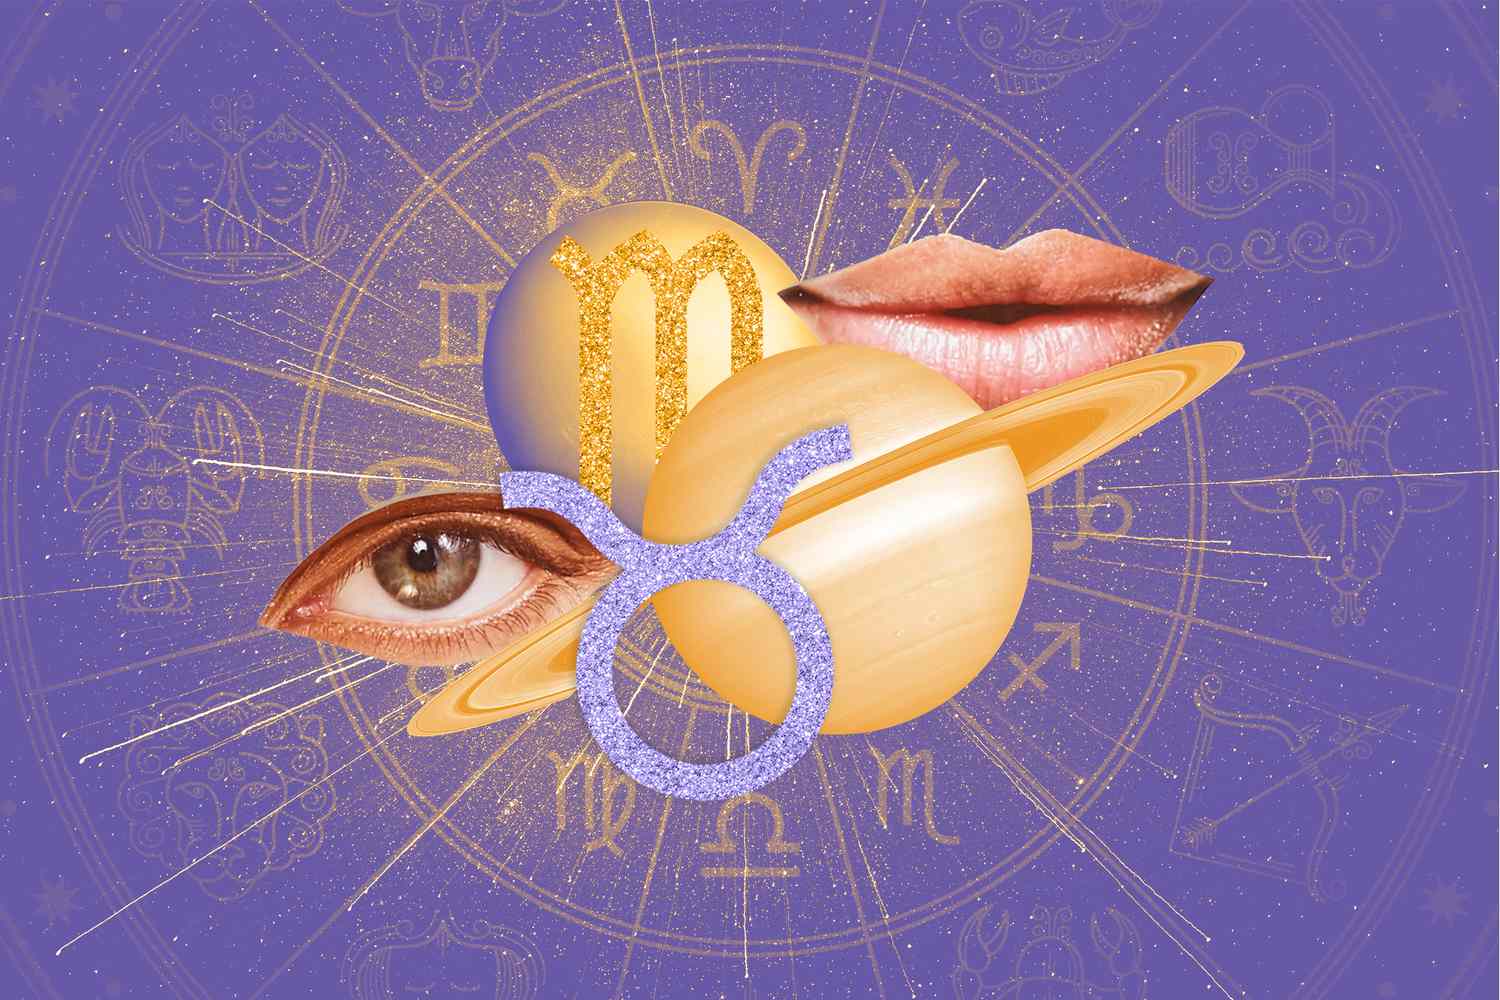 Find Out What Your 2022 Horoscope Says About the Year Ahead